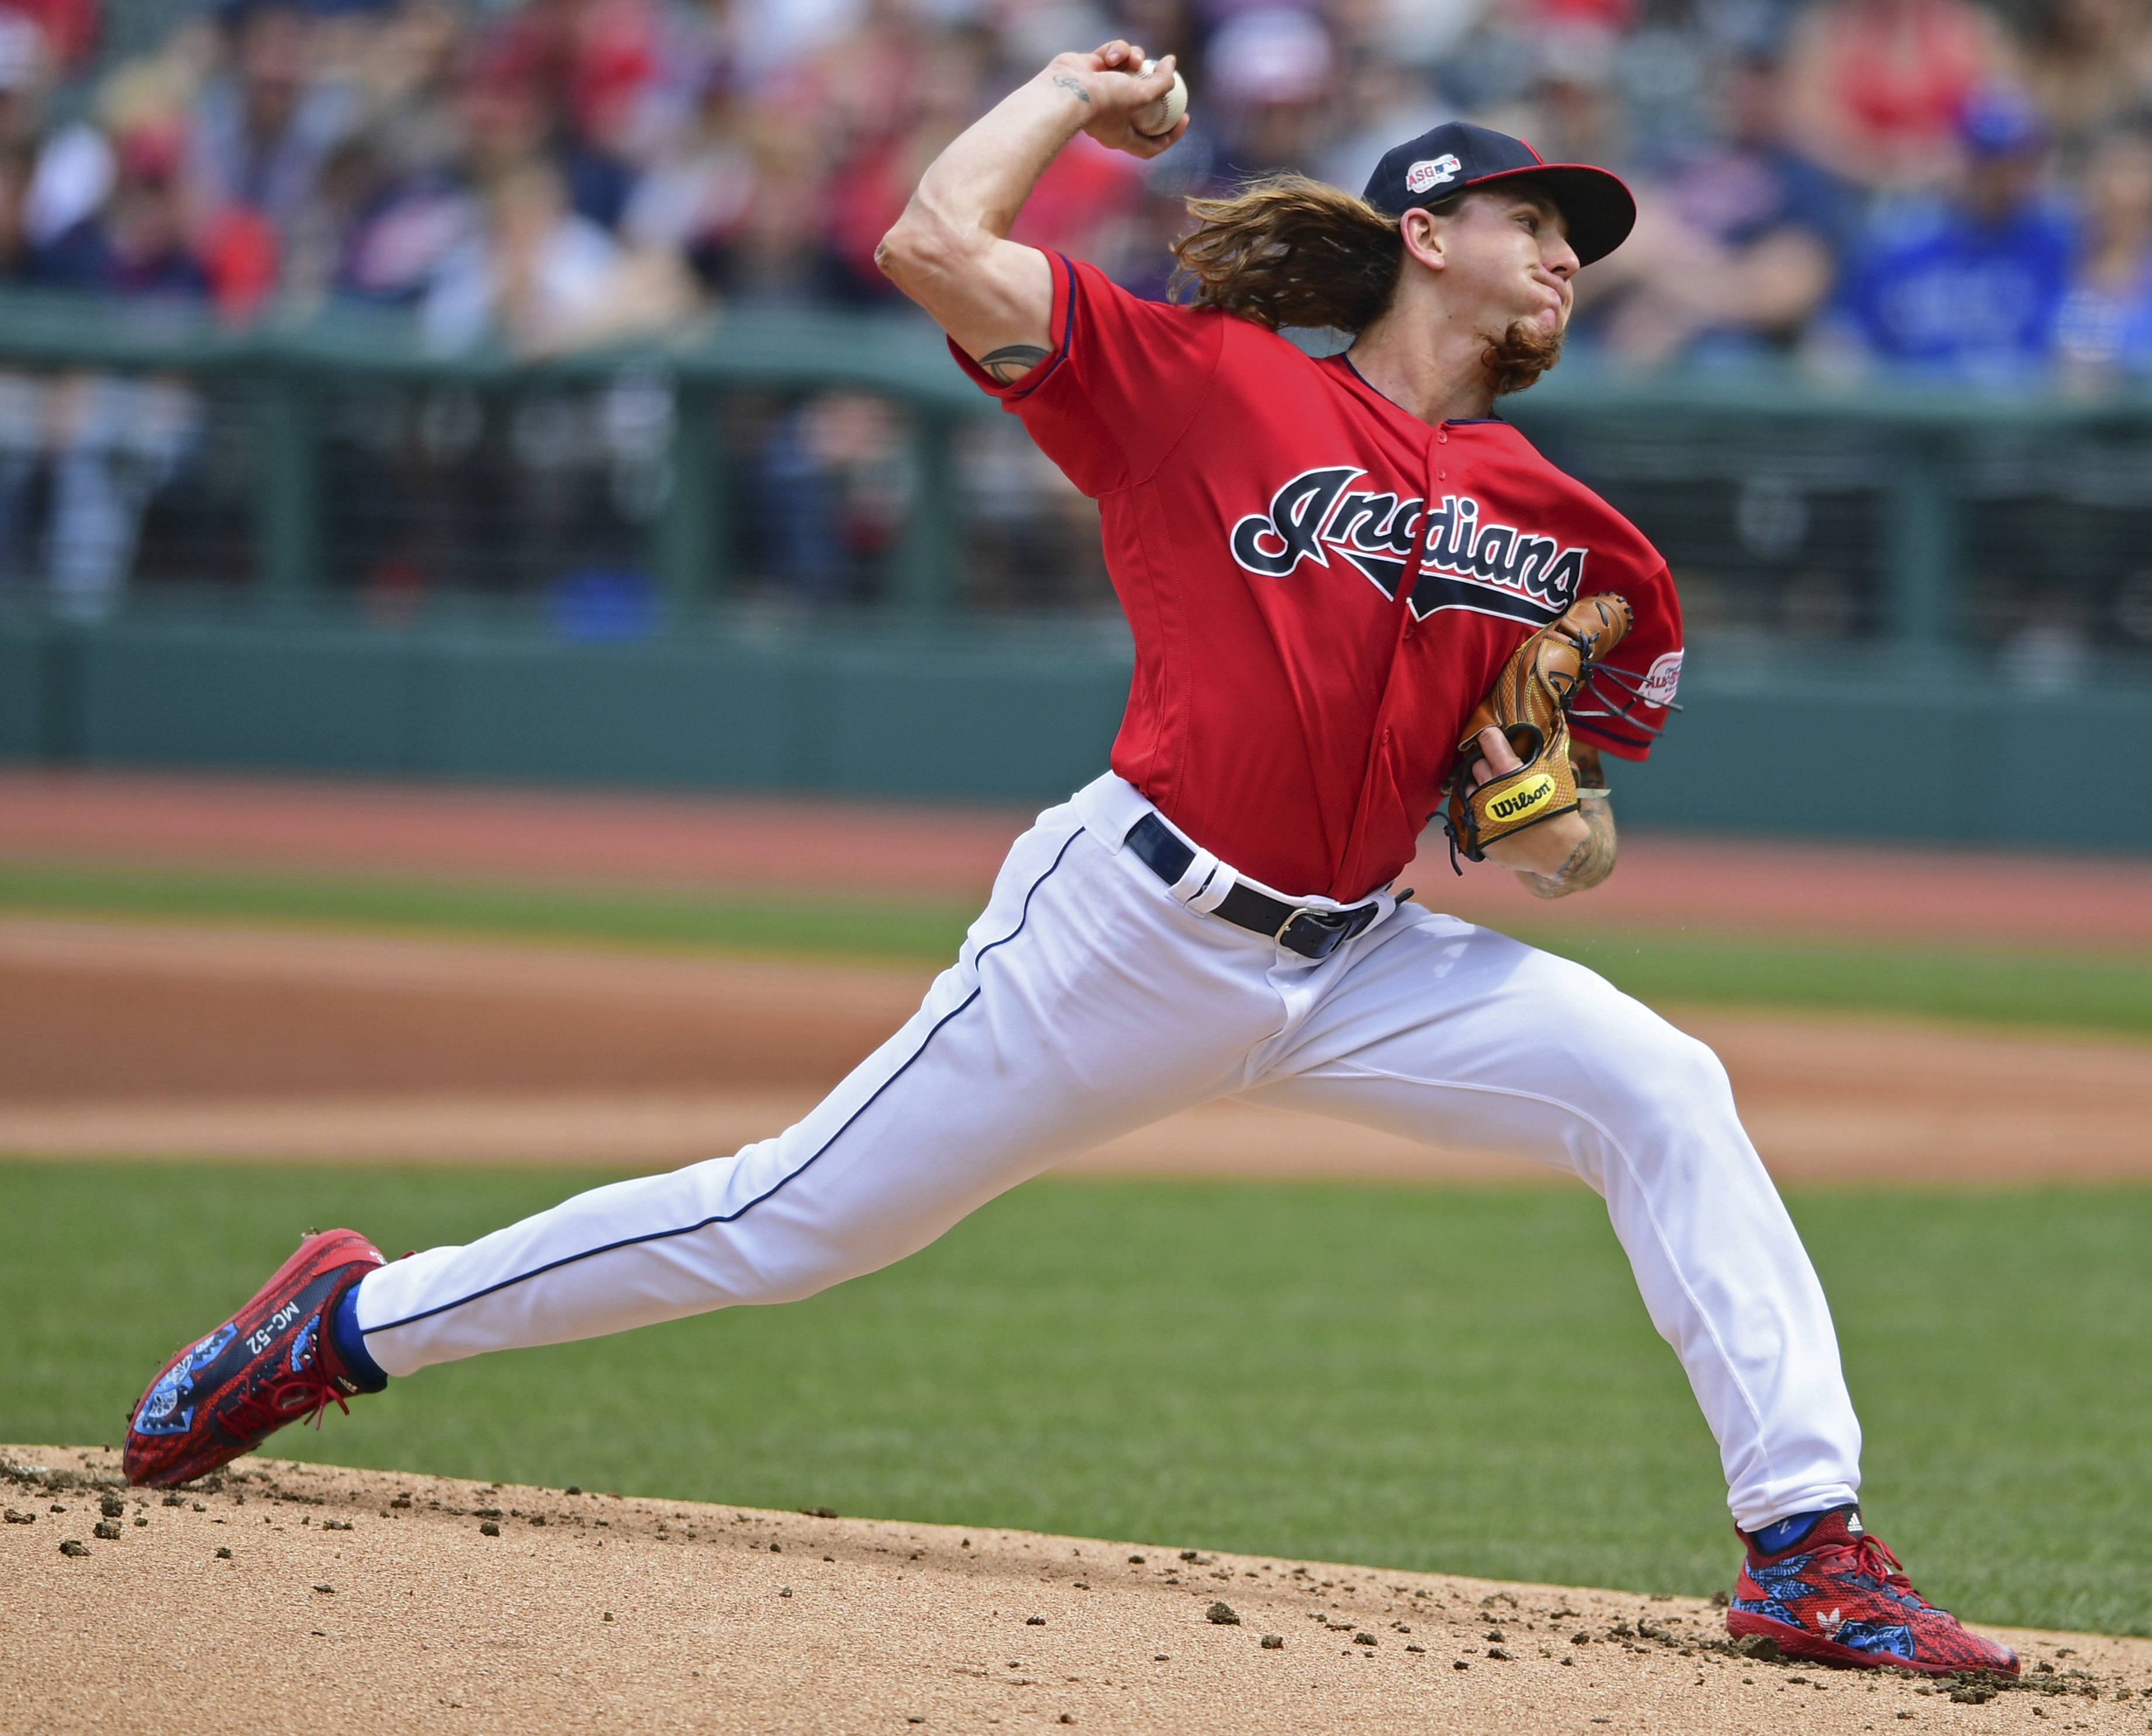 Indians' Clevinger back from injury, set to start Monday